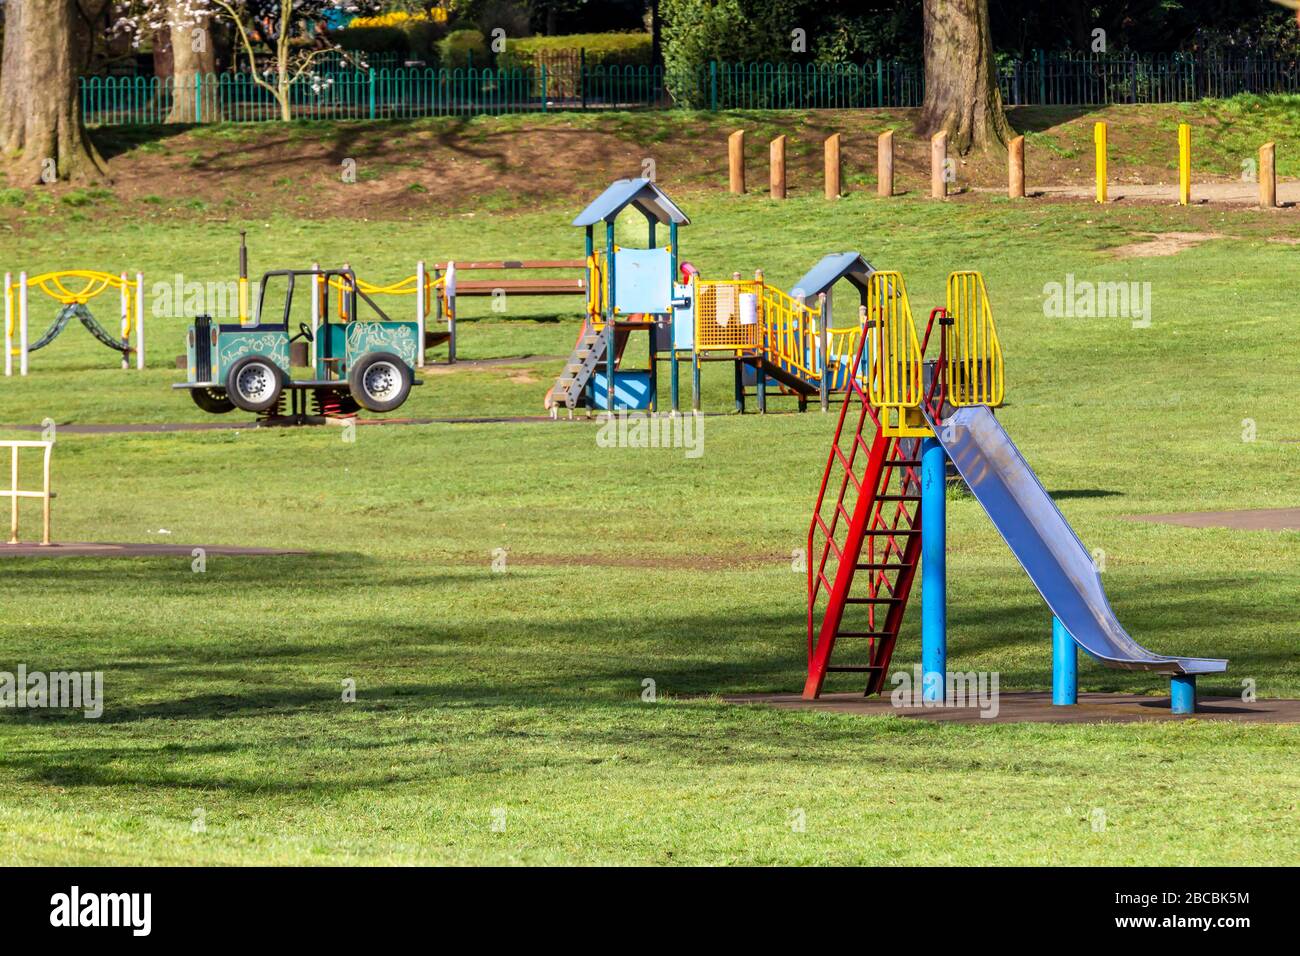 Northampton, UK. 4th April, 2020. Covid-19 lockdown, the children's play area in Abington Park is empty as it's closed due to the Coronavirus, normally it would be busy this time of the morning on a sunny day. Credit: Keith J Smith./Alamy Live News Stock Photo